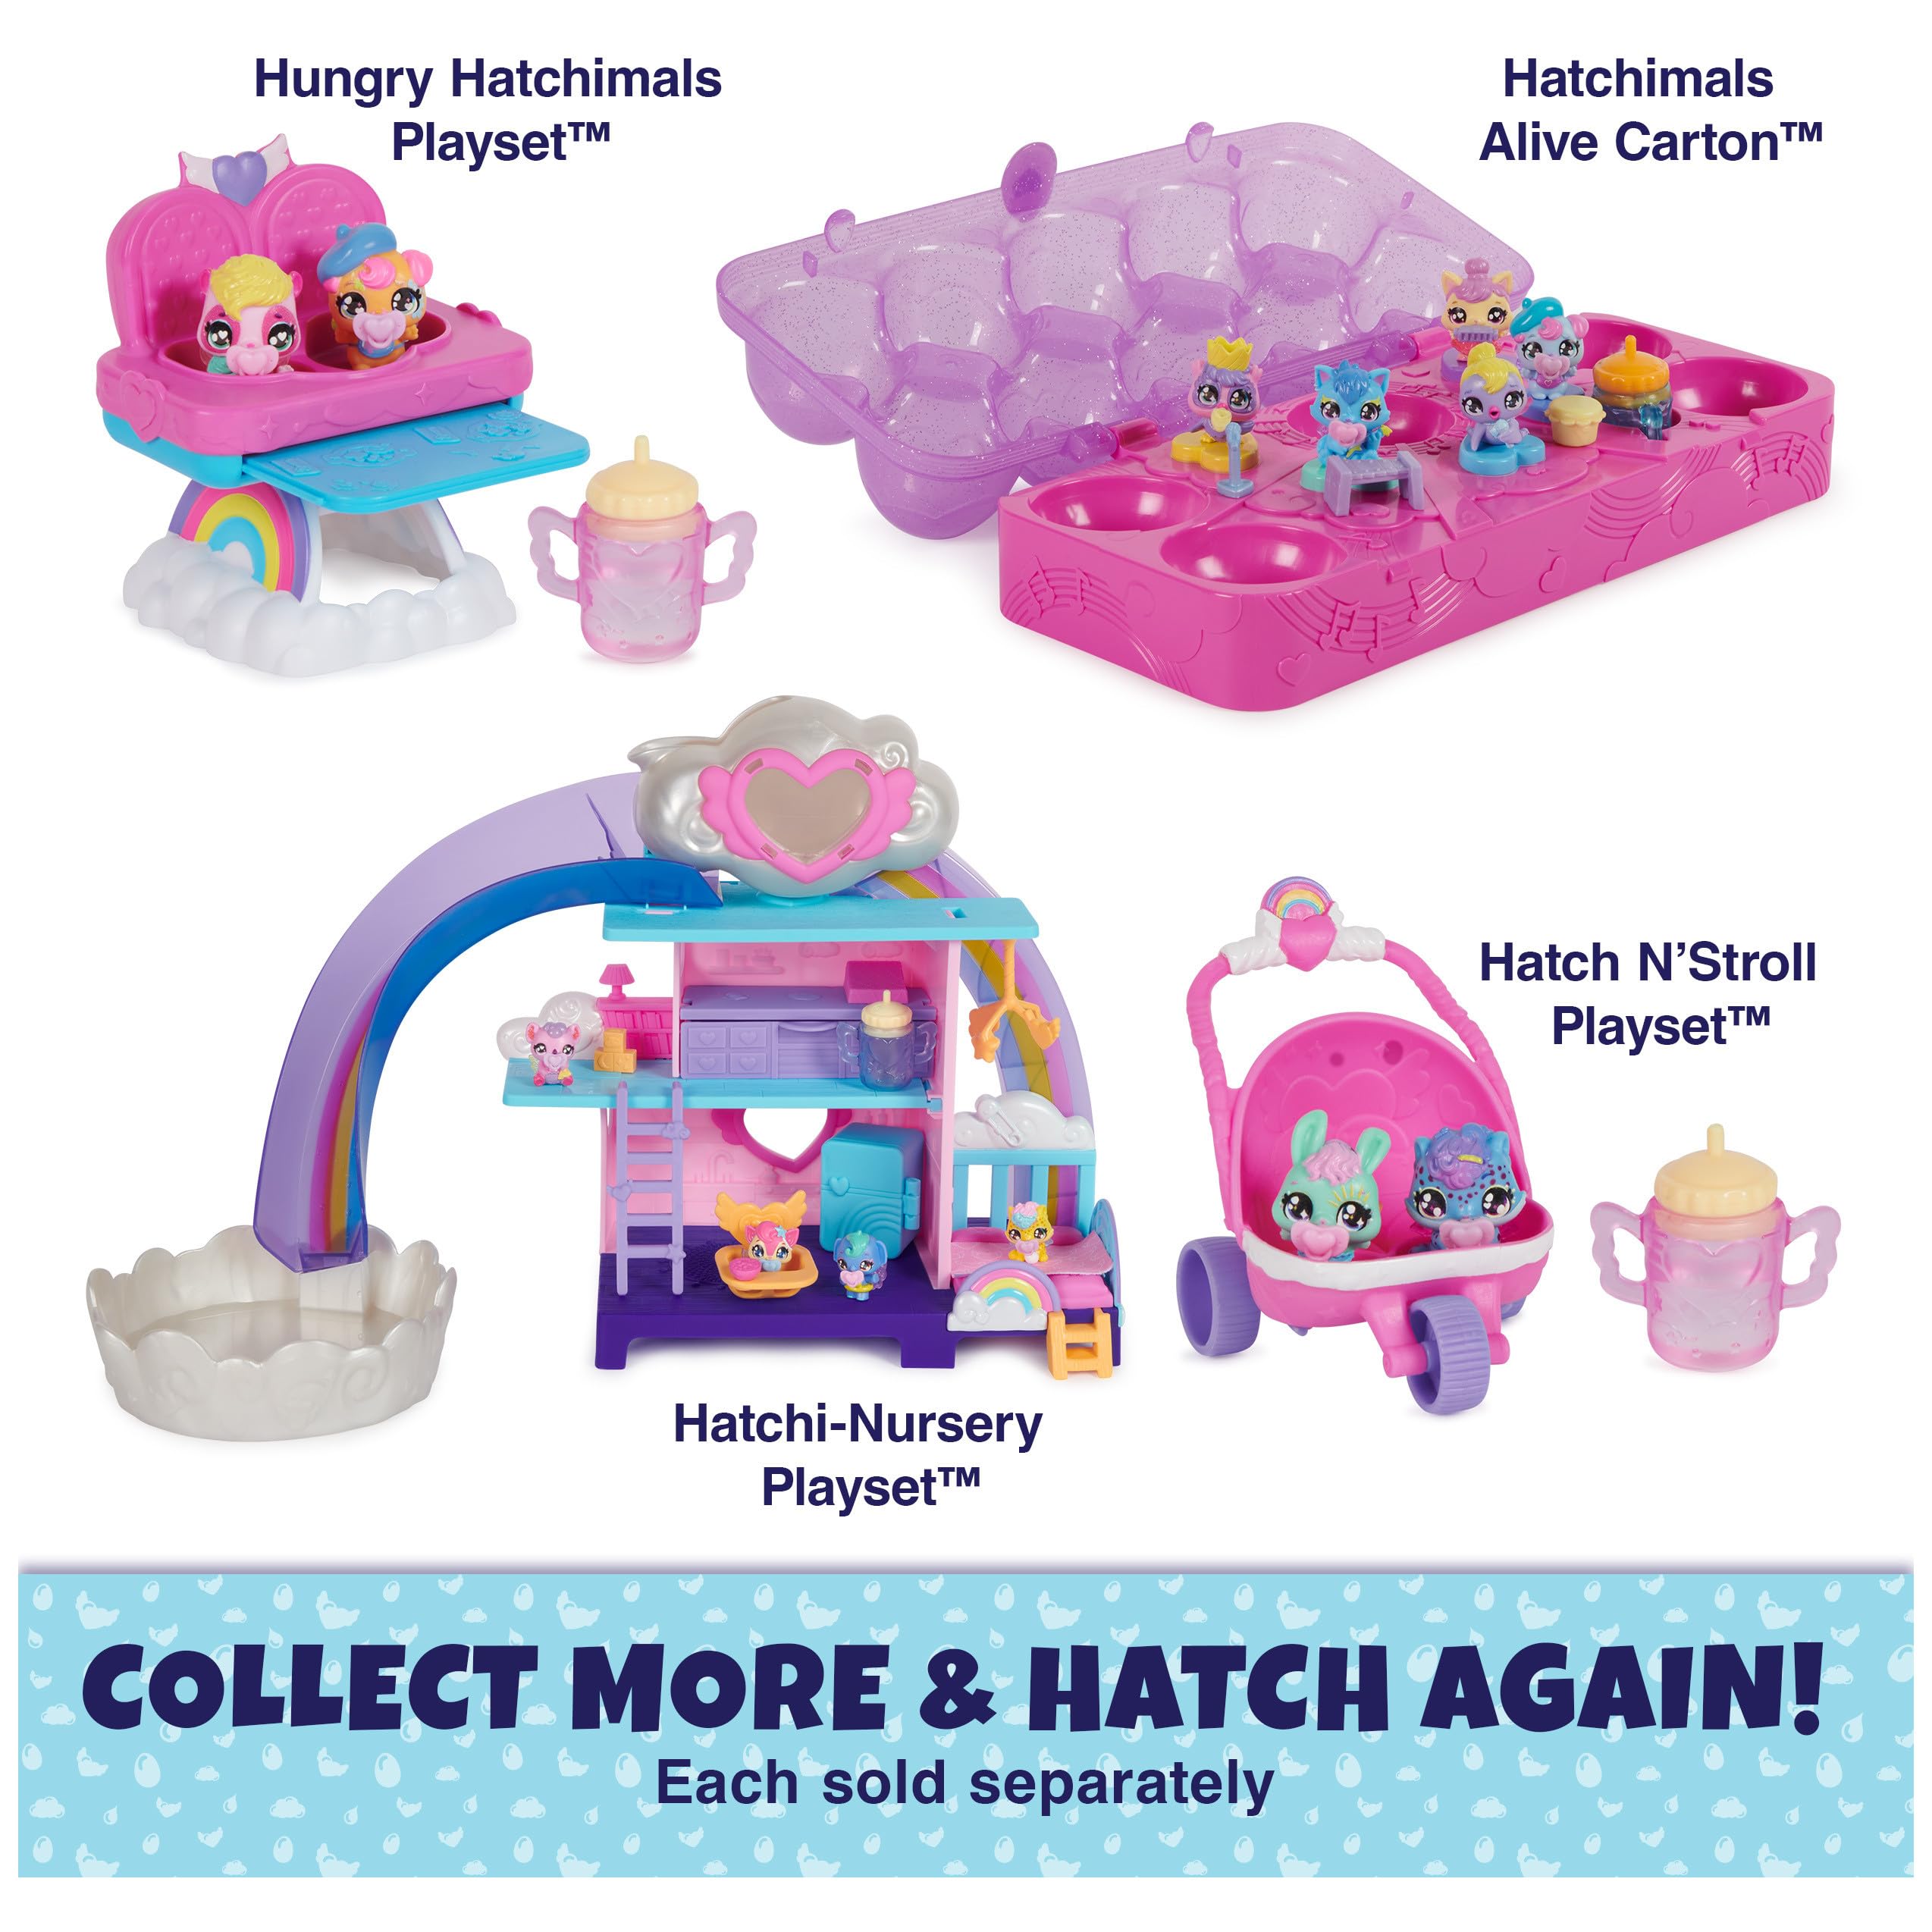 Hatchimals Alive, Hungry Hatchimals Playset with Highchair Toy and 2 Mini Figures in Self-Hatching Eggs, Kids Toys for Girls and Boys Ages 3 and up